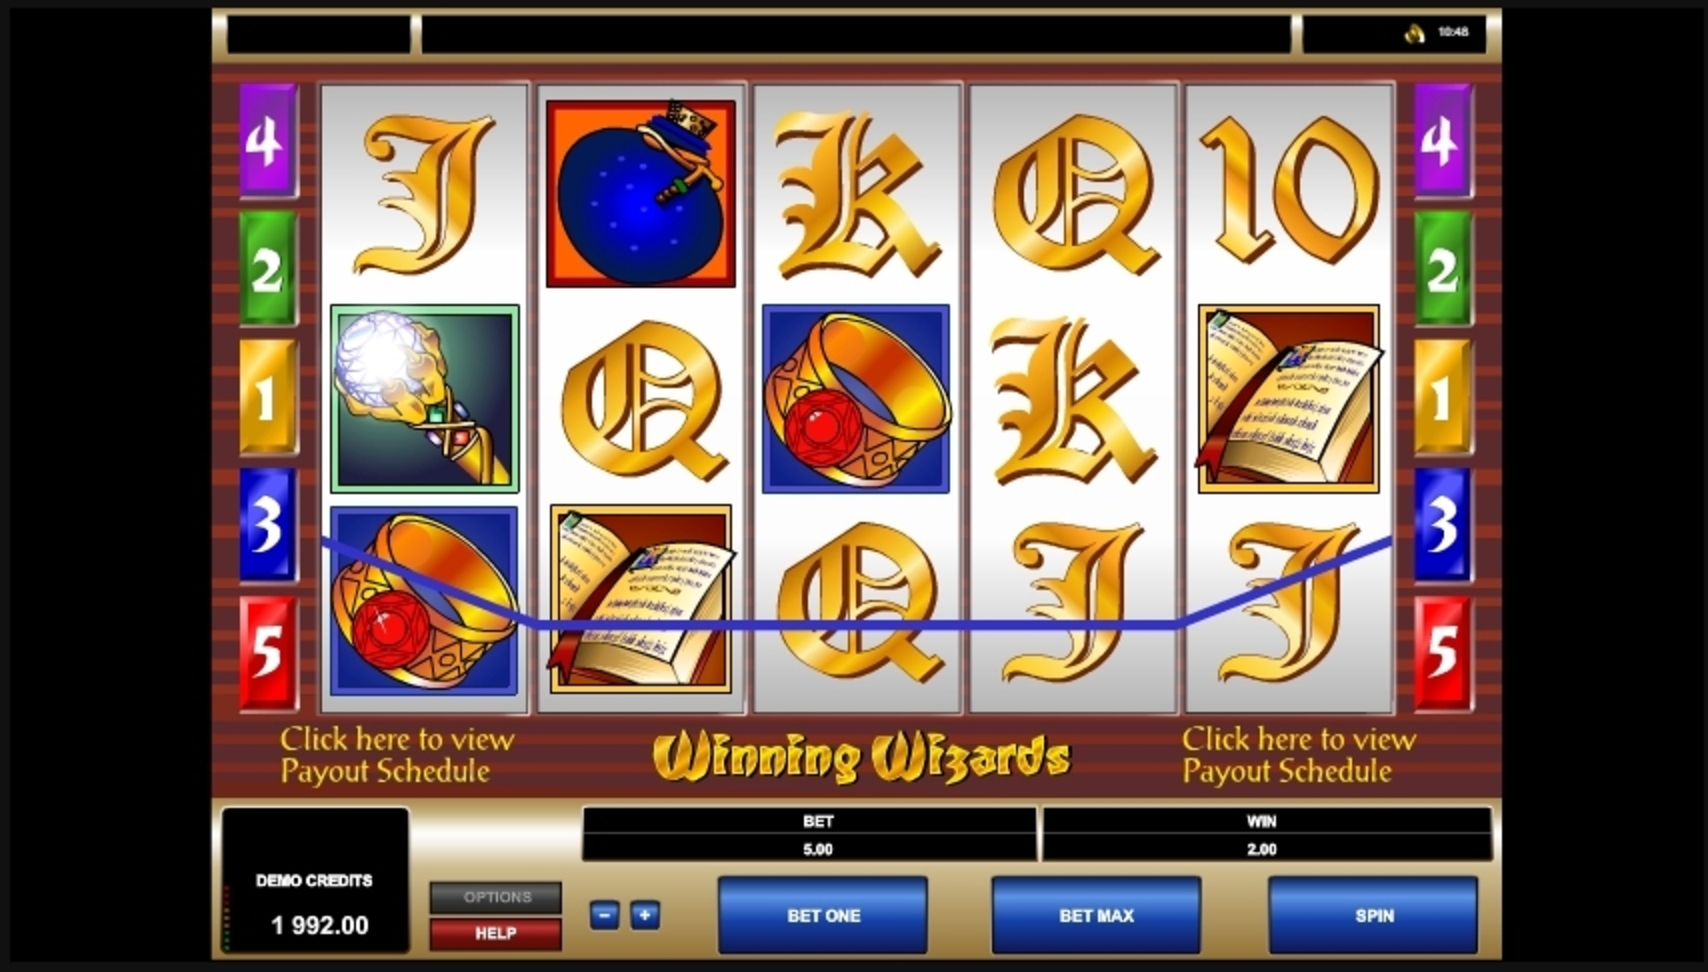 Win Money in Winning Wizards Free Slot Game by Microgaming